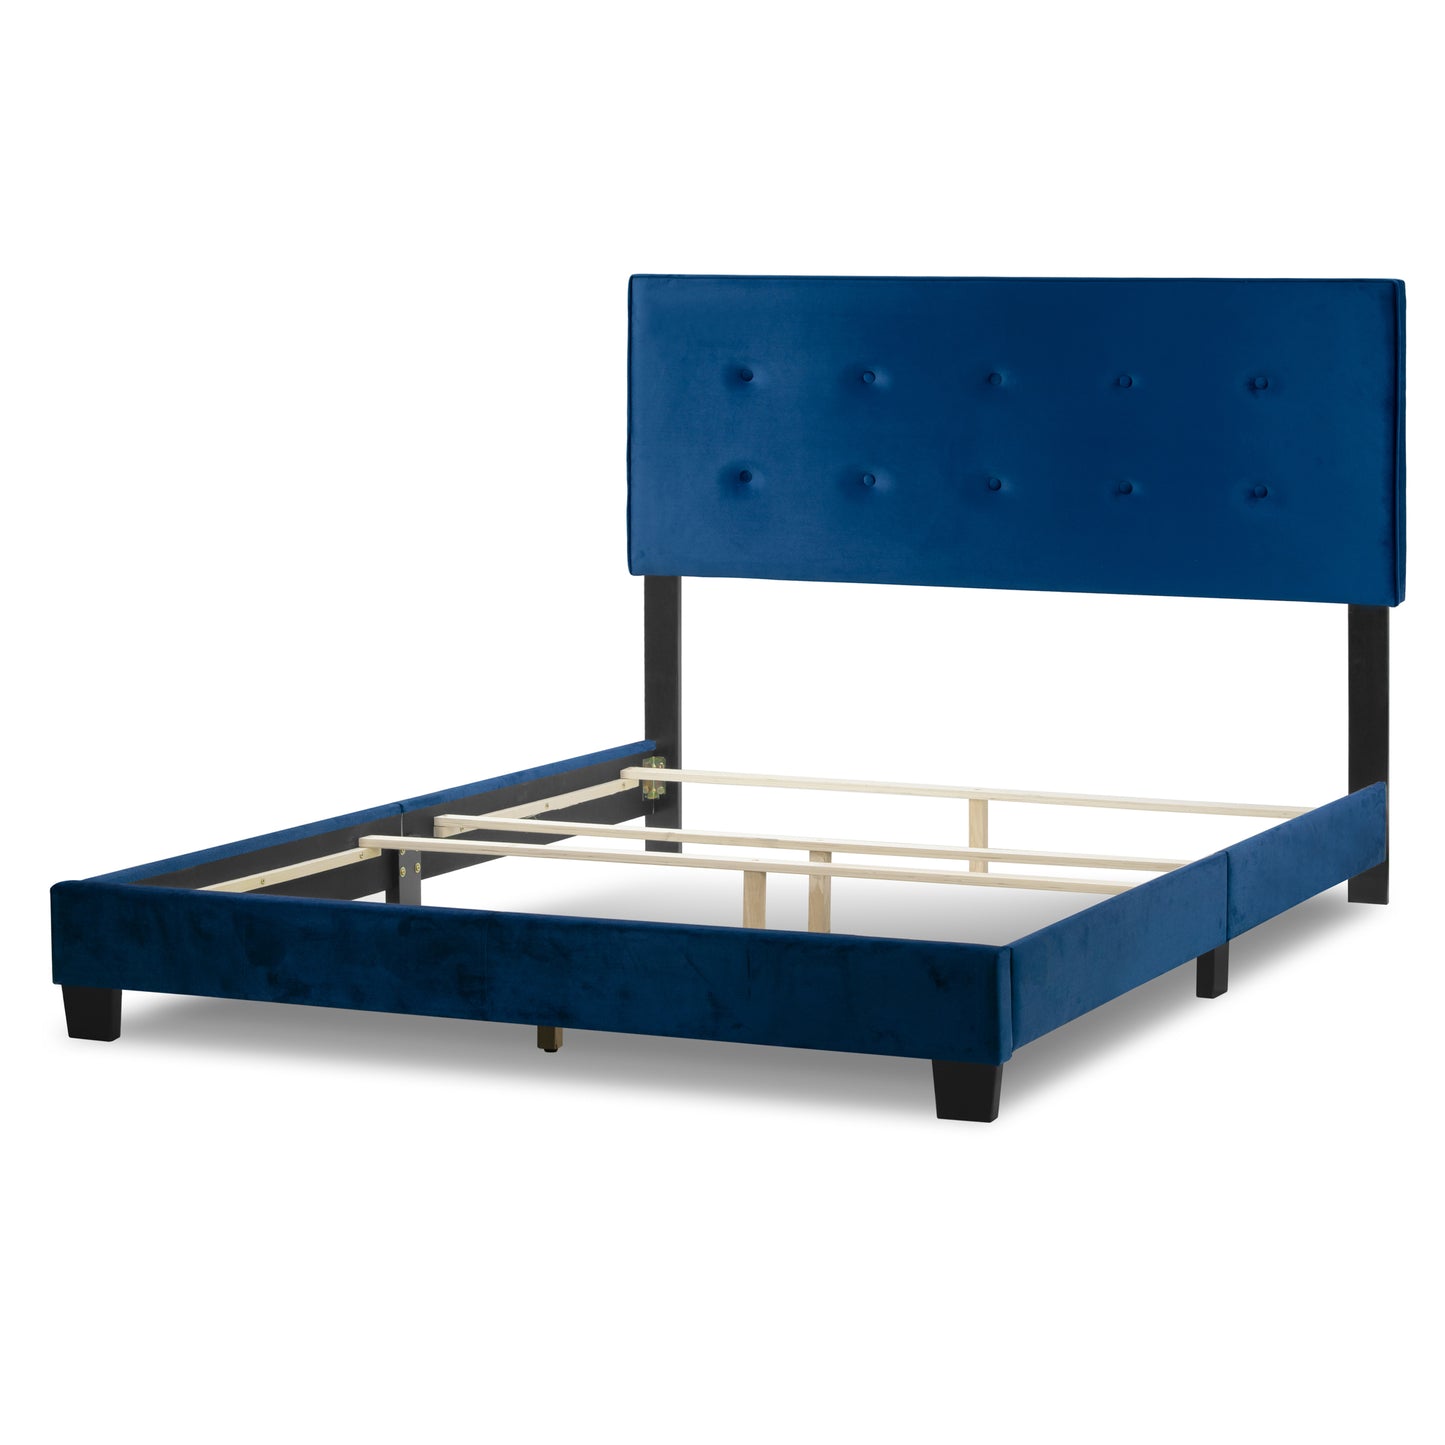 Auryon Navy Blue Velvety Fabric Queen Bed with Button Tufting